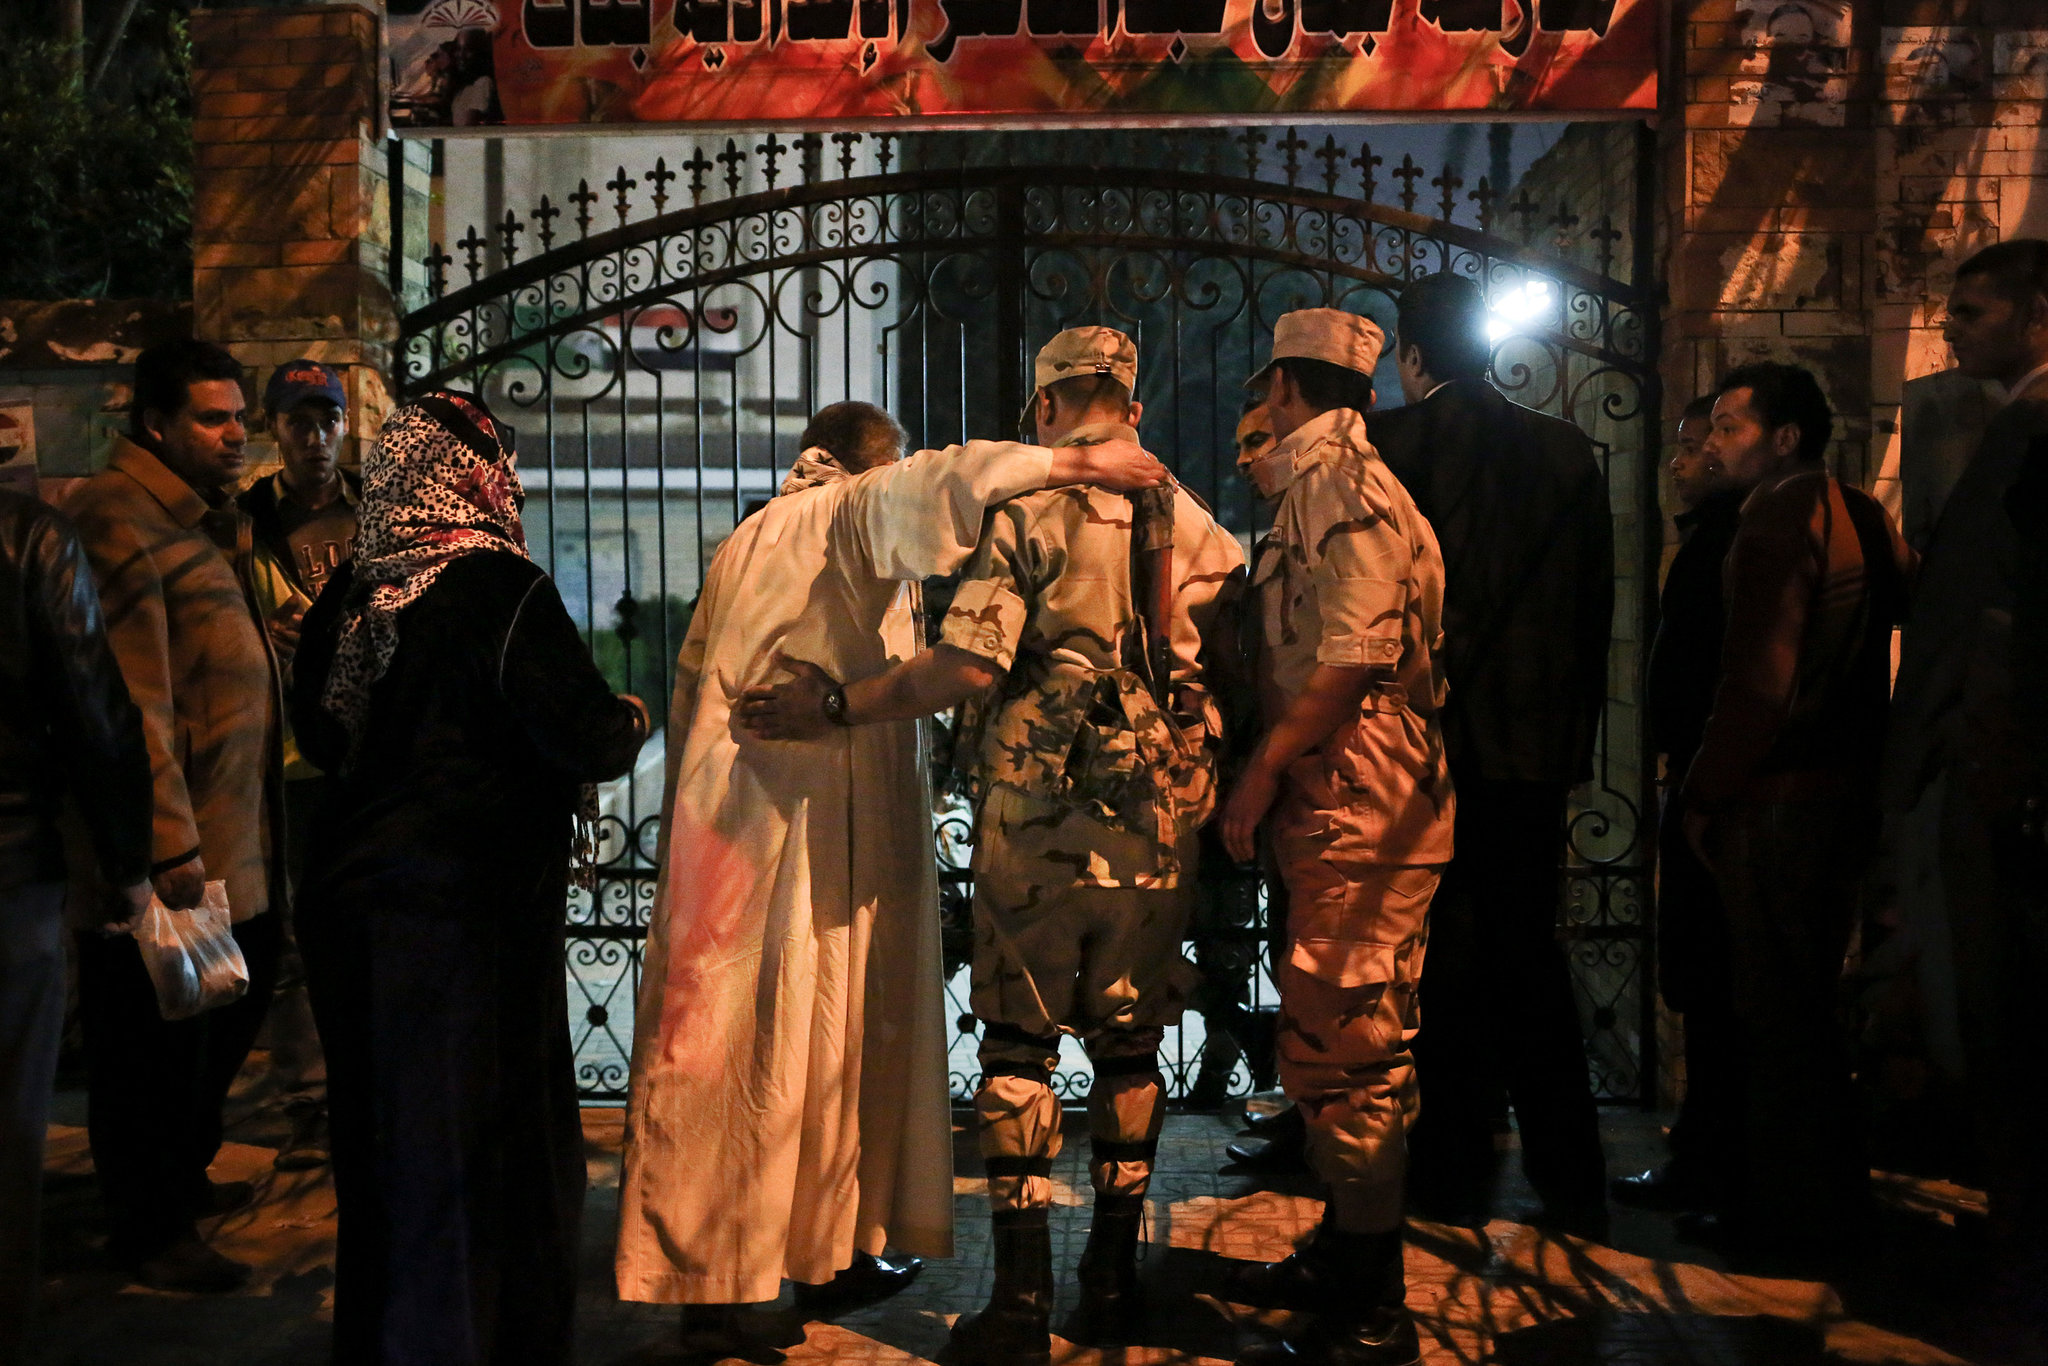 On Tuesday, soldiers helped a man into a polling station in Cairo, where Egyptia